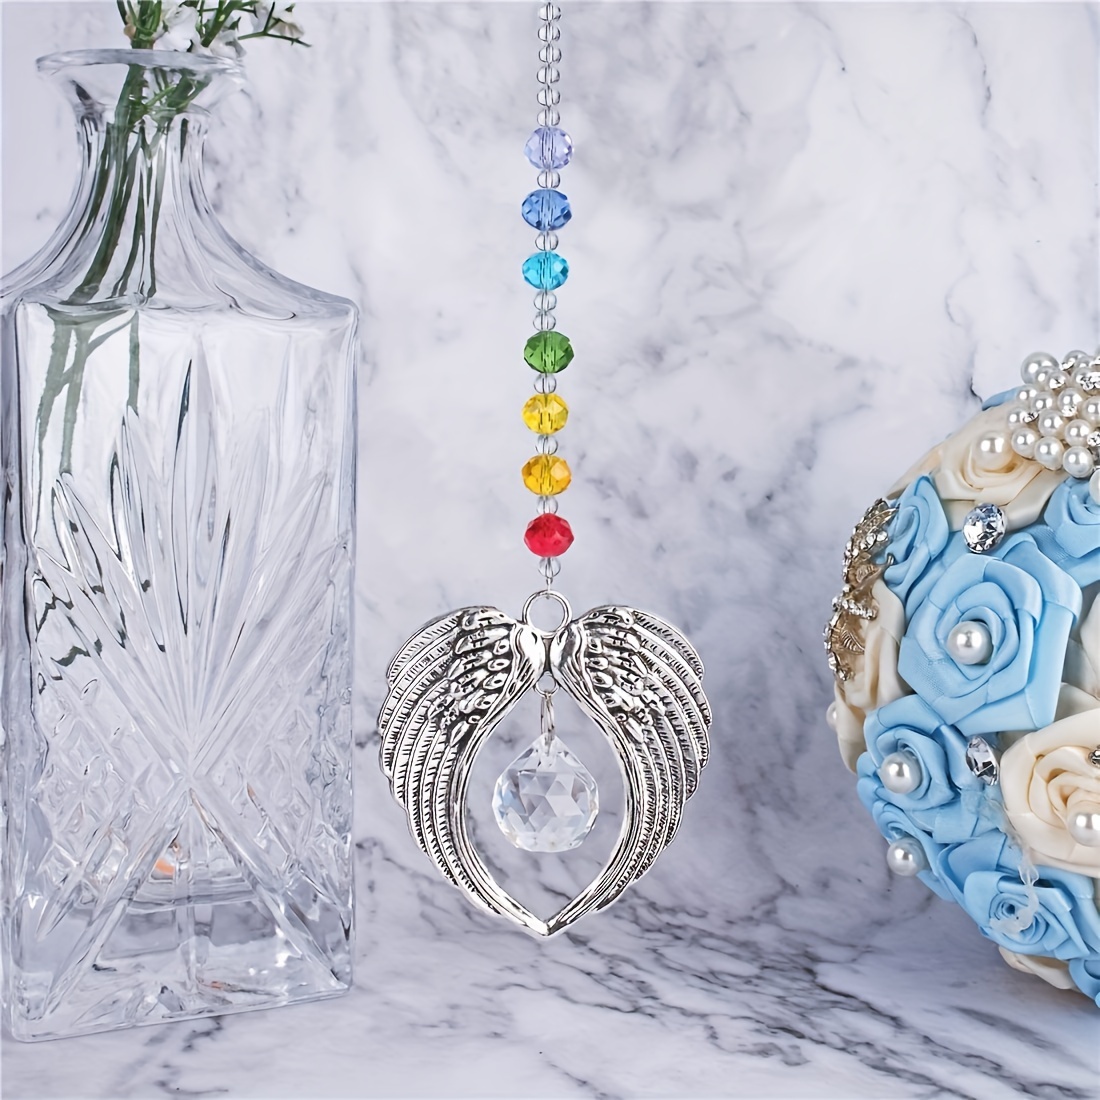 classic angel wing crystal pendant with glass beads sun catcher for wedding home window decor no feathers no electricity required